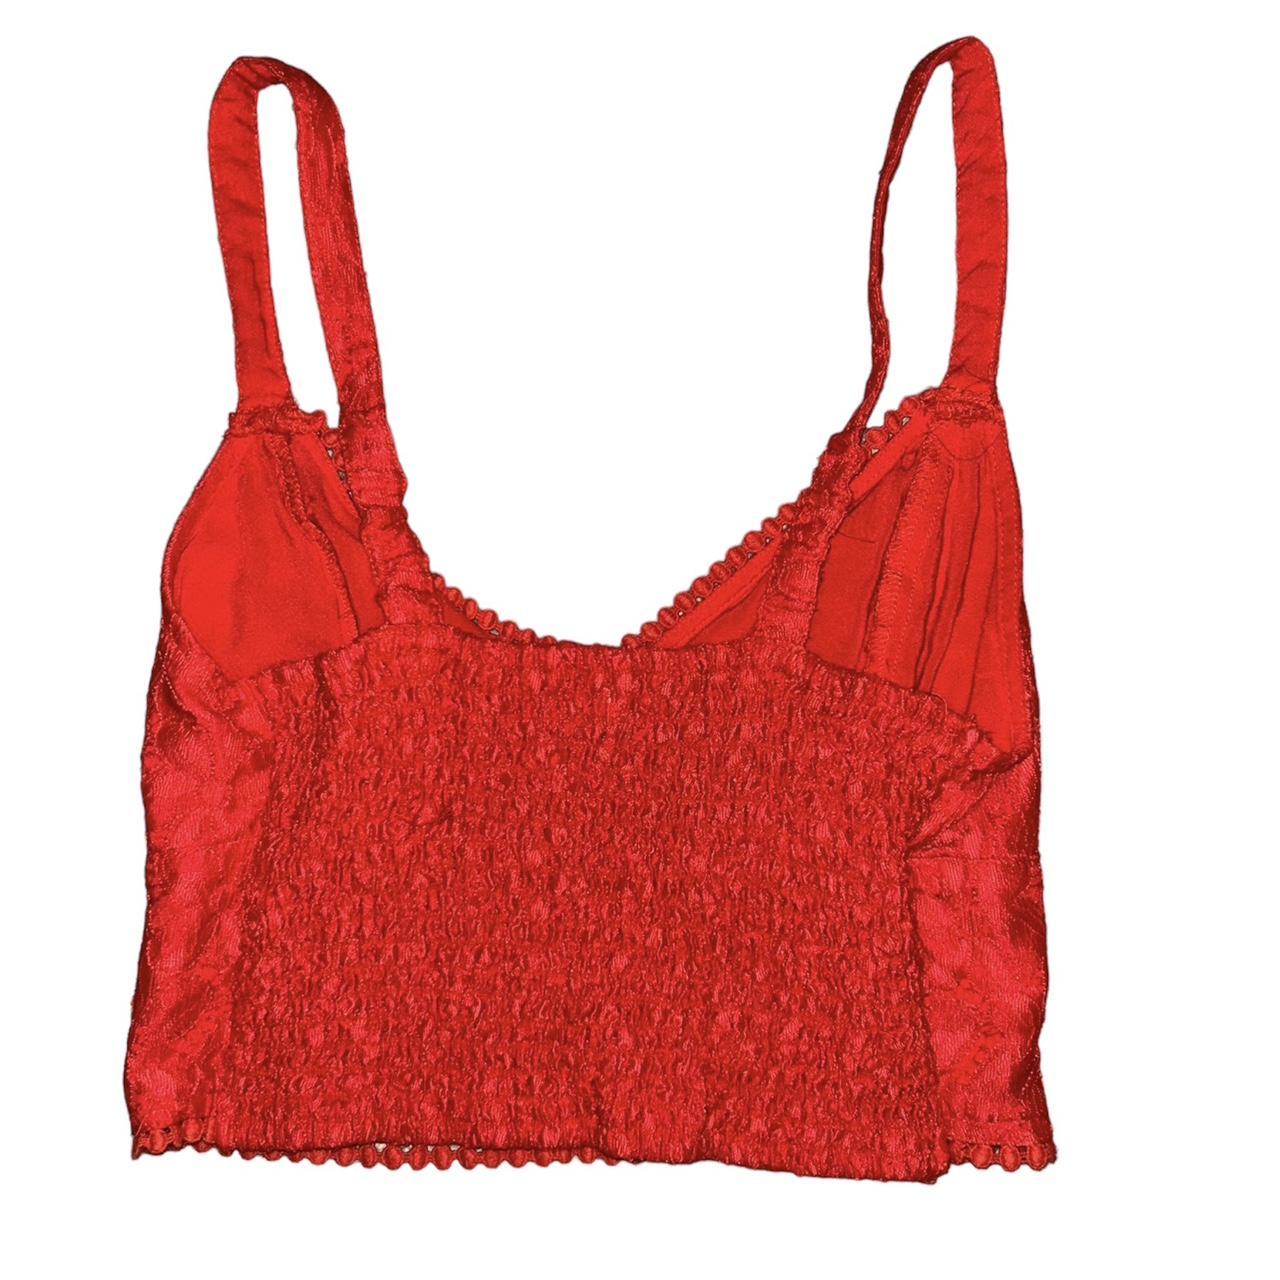 red lace bralette top, brand- hollister